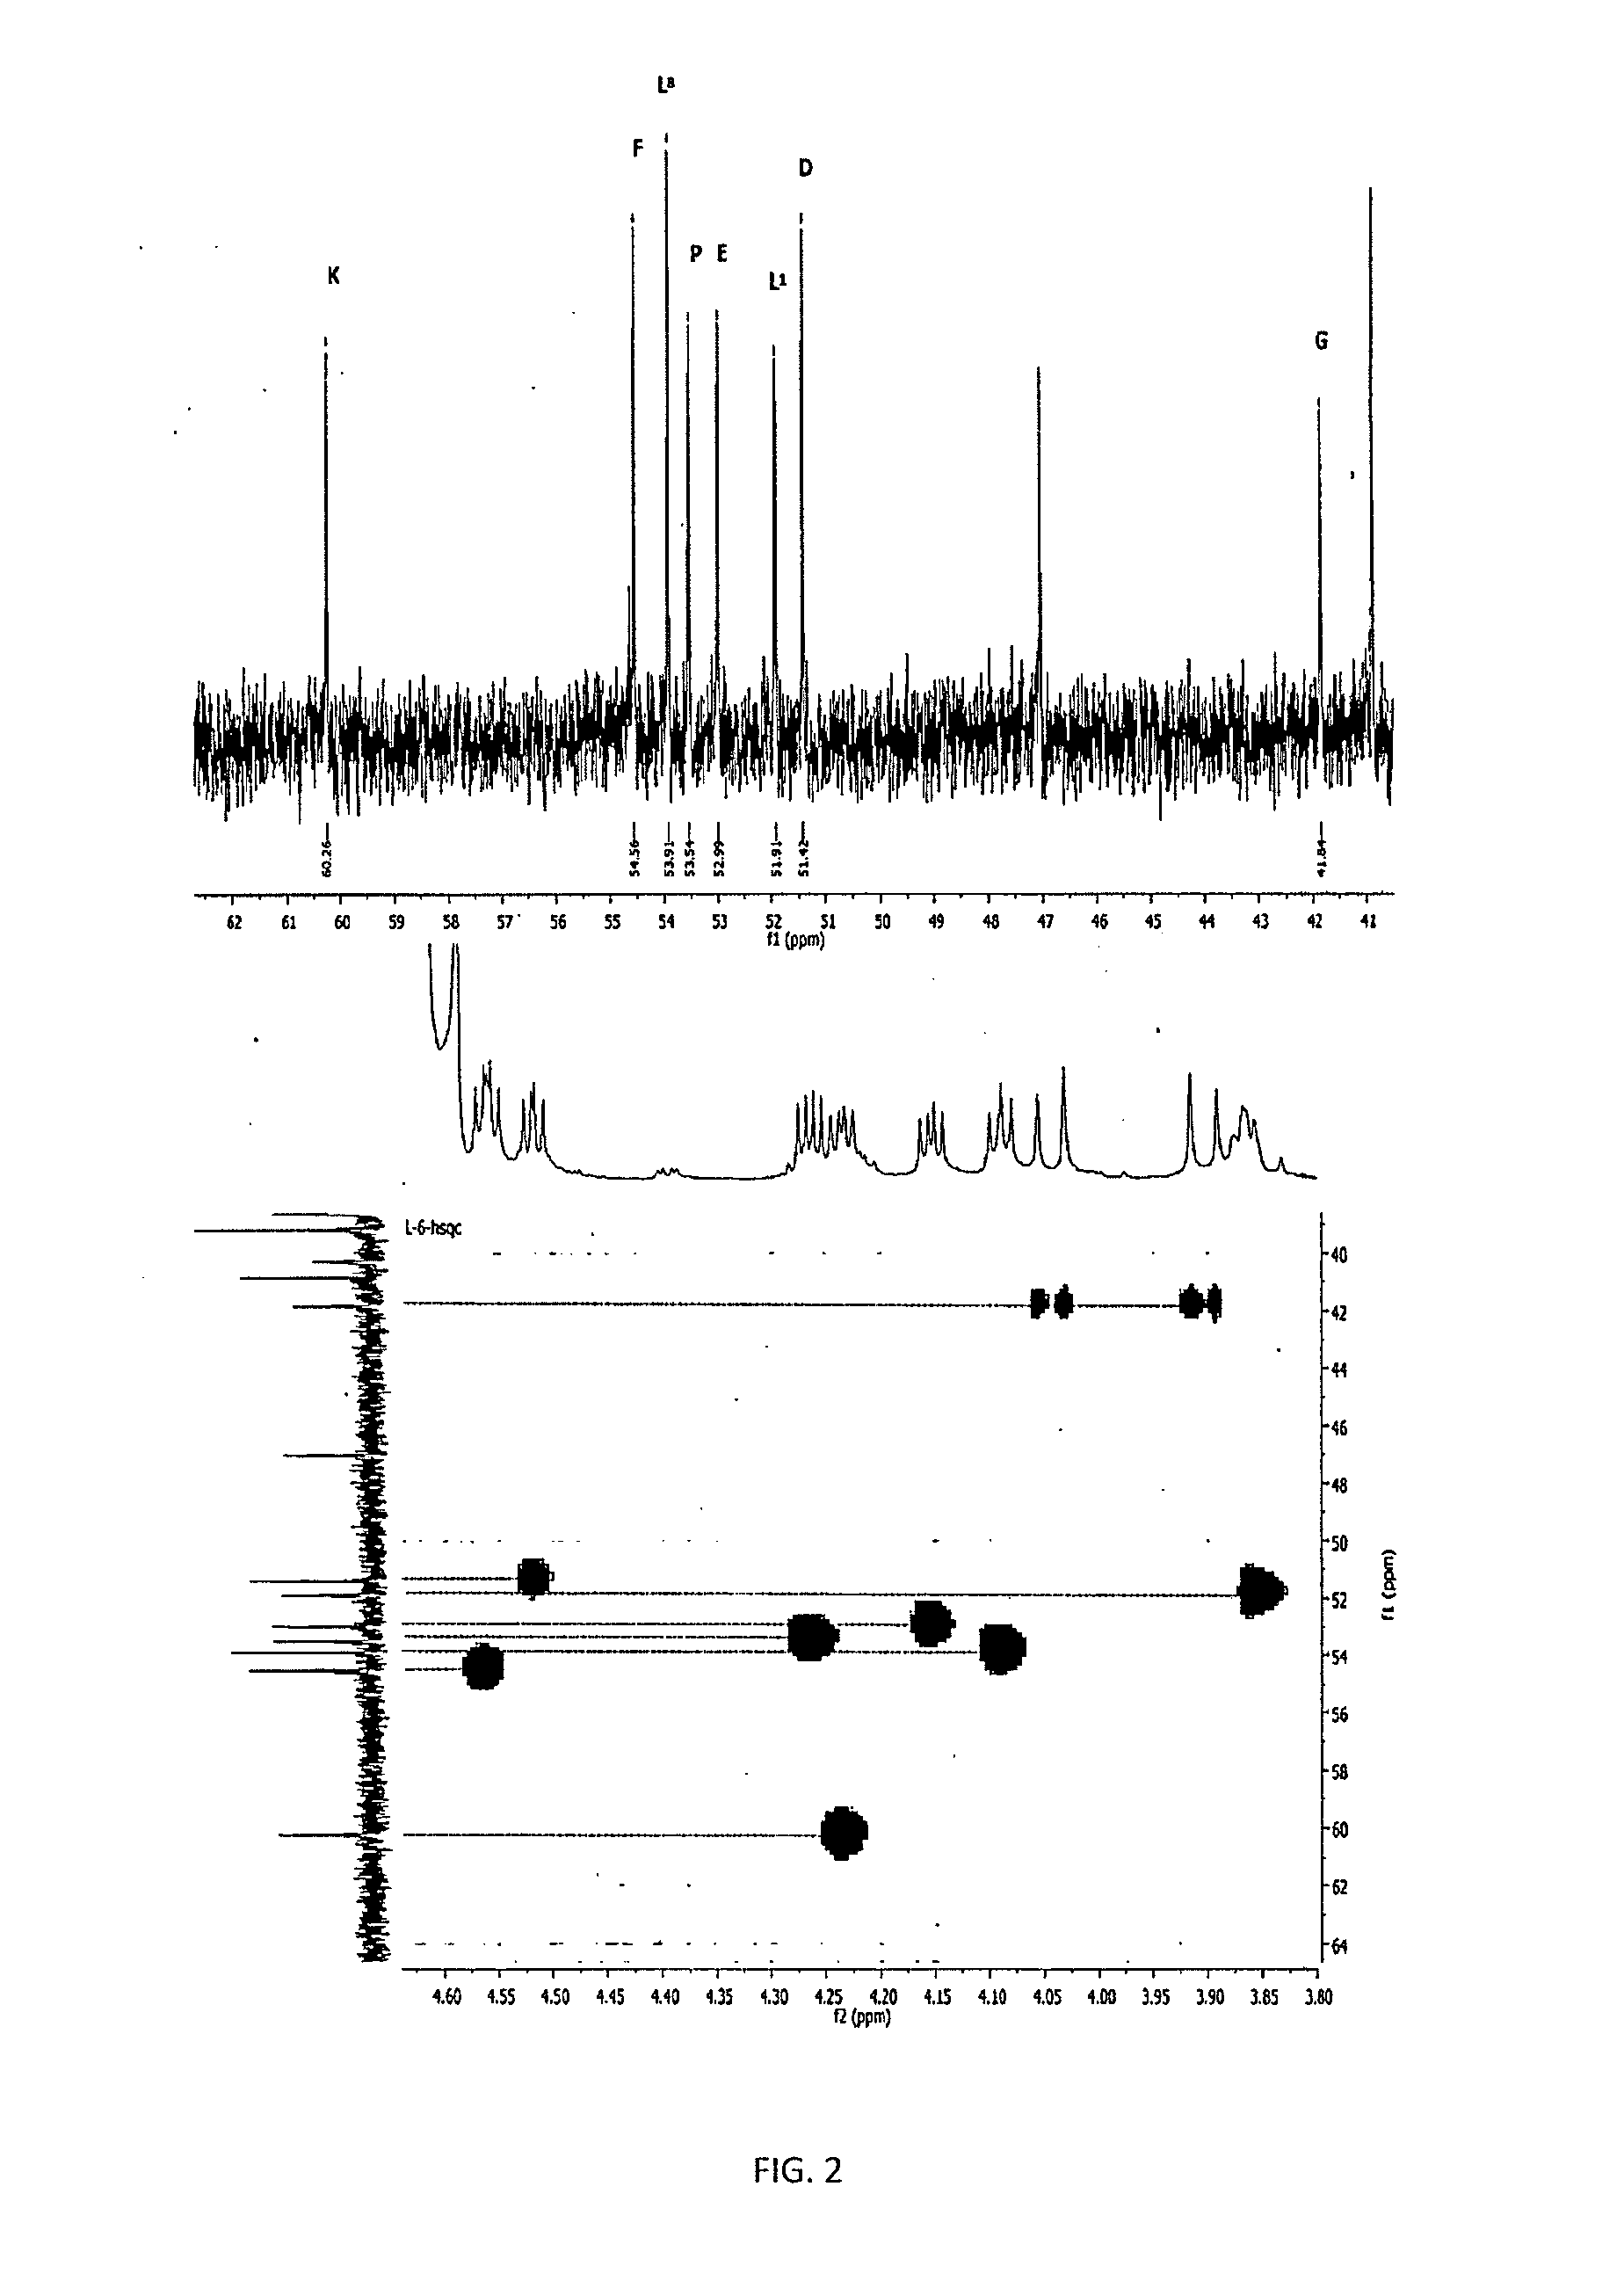 Immunomodulator metallopeptides (IMMPS) and compositions containing same